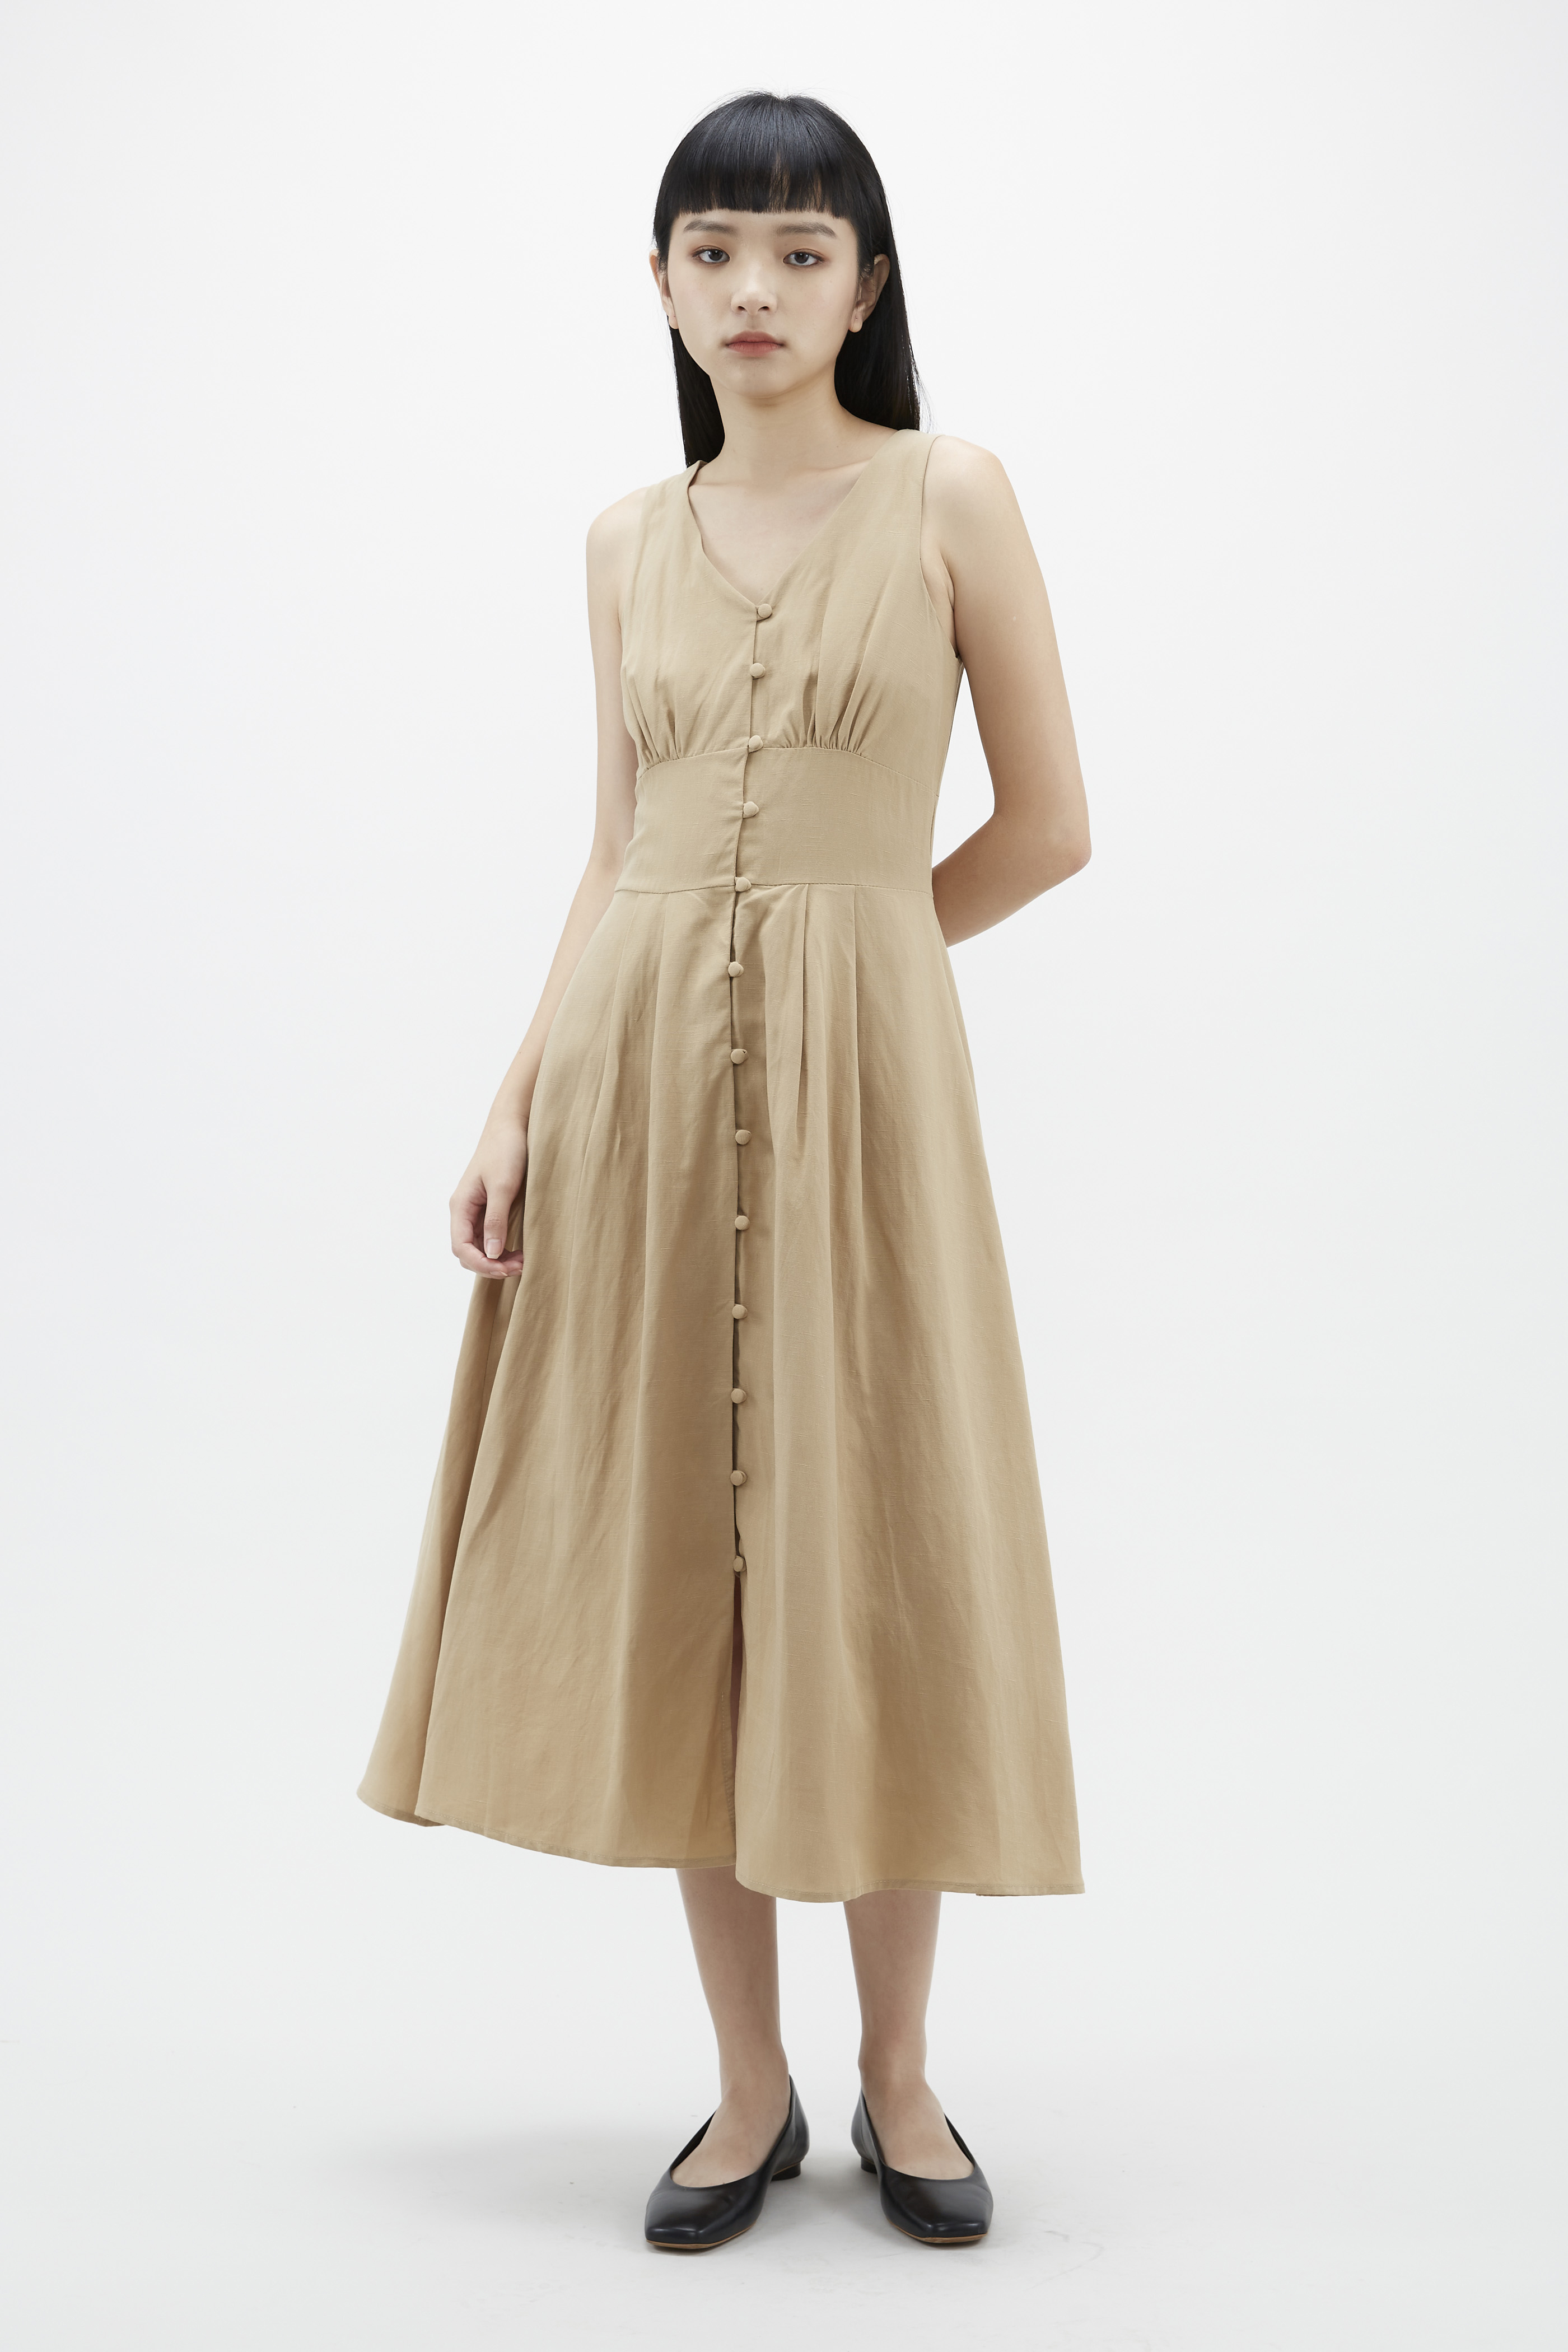 Madelle Loop-Button Dress